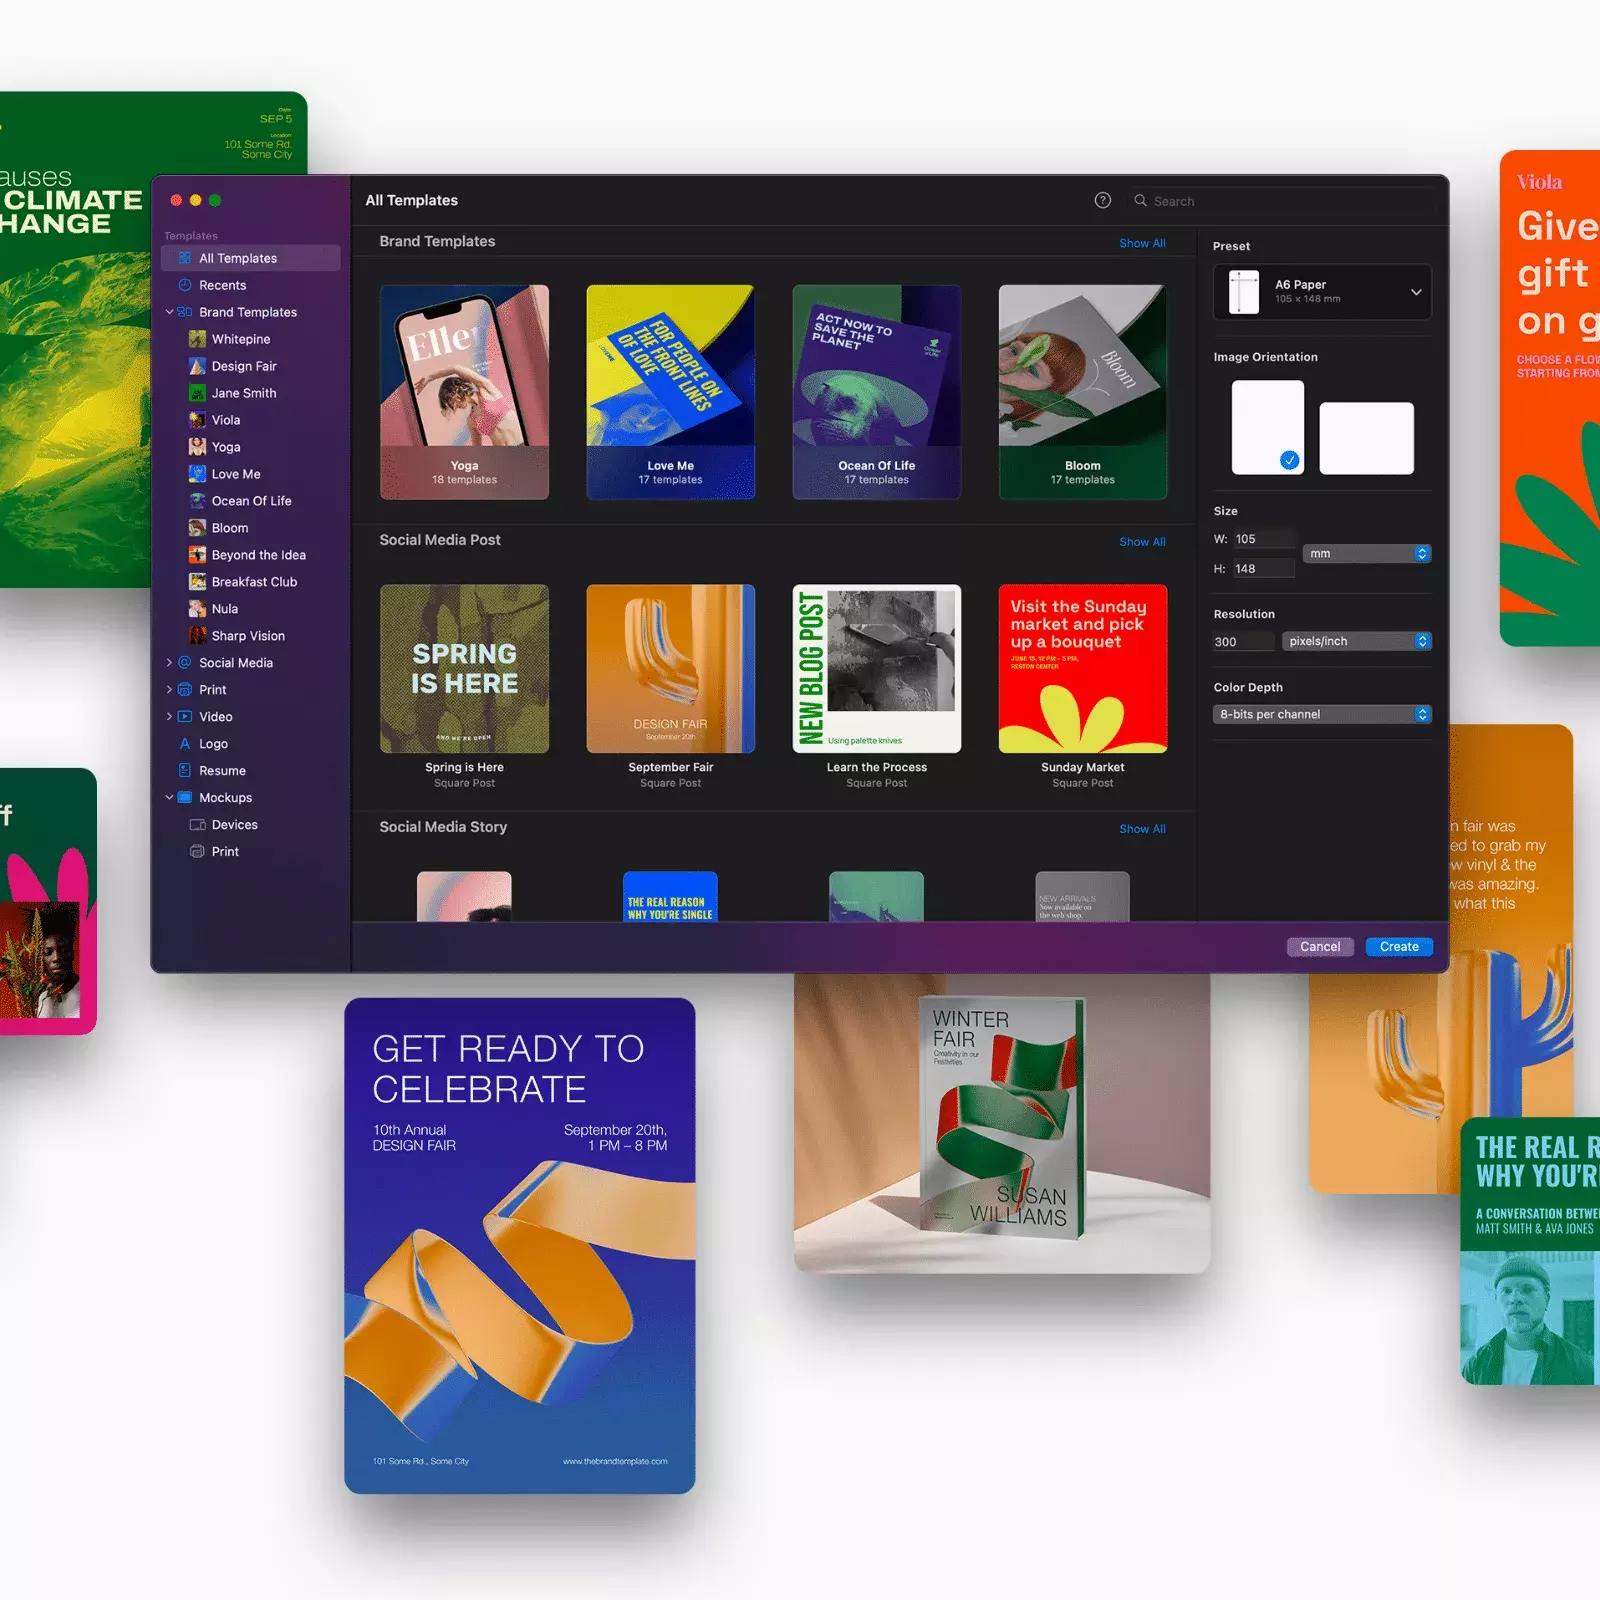 Pixelmator Pro 3.0 makes it easy to create with stunning design templates and mockups